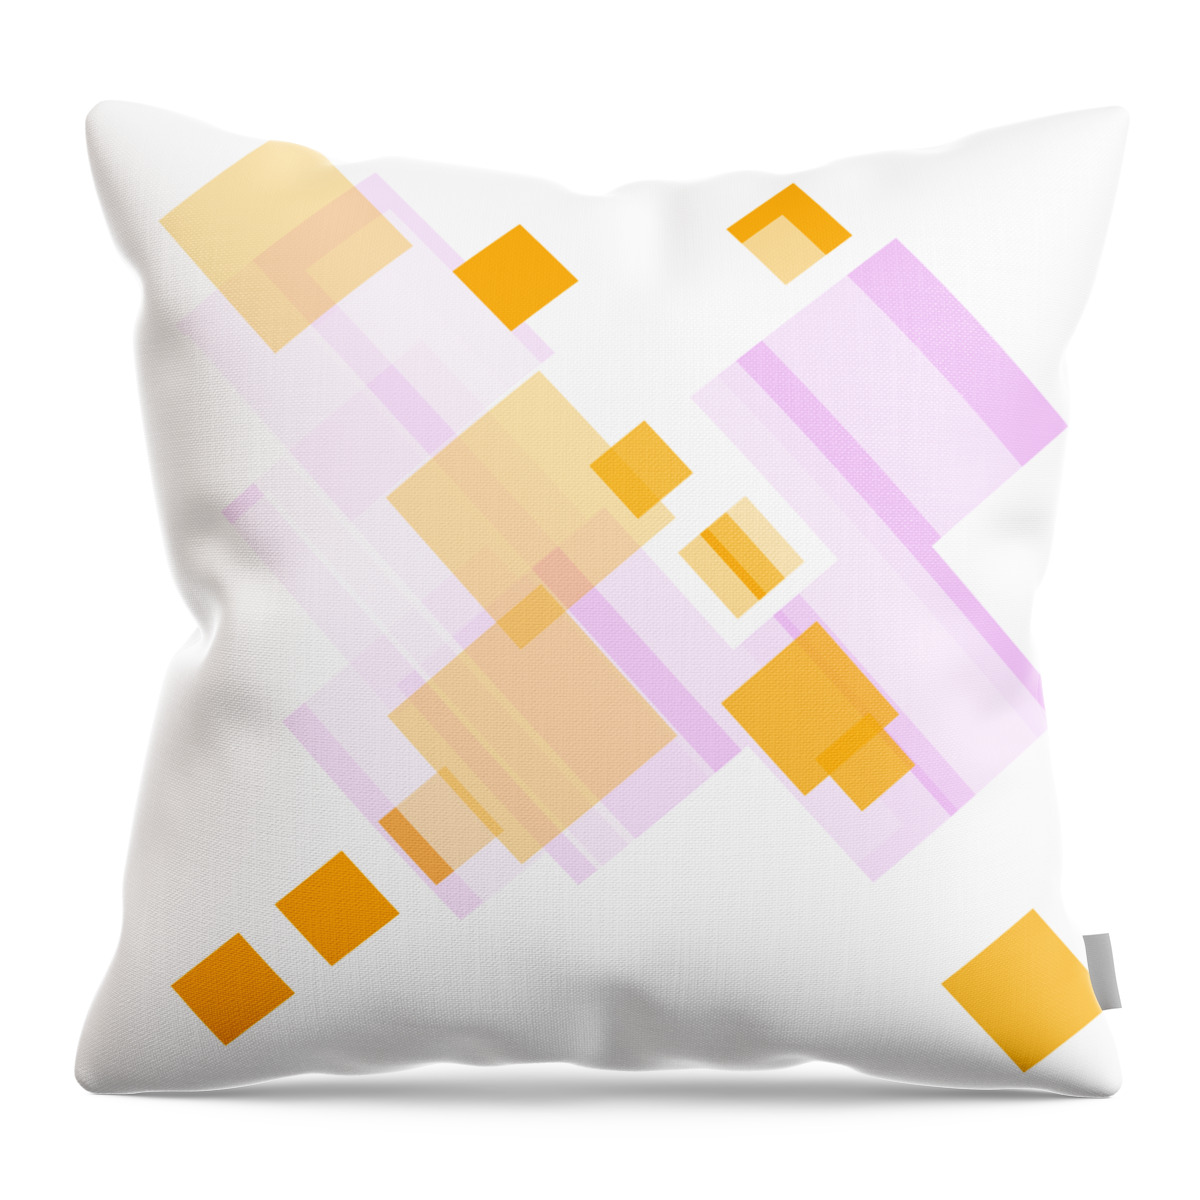 Orange Throw Pillow featuring the digital art Soft orange and delicate pink by Ewelina Karbownik